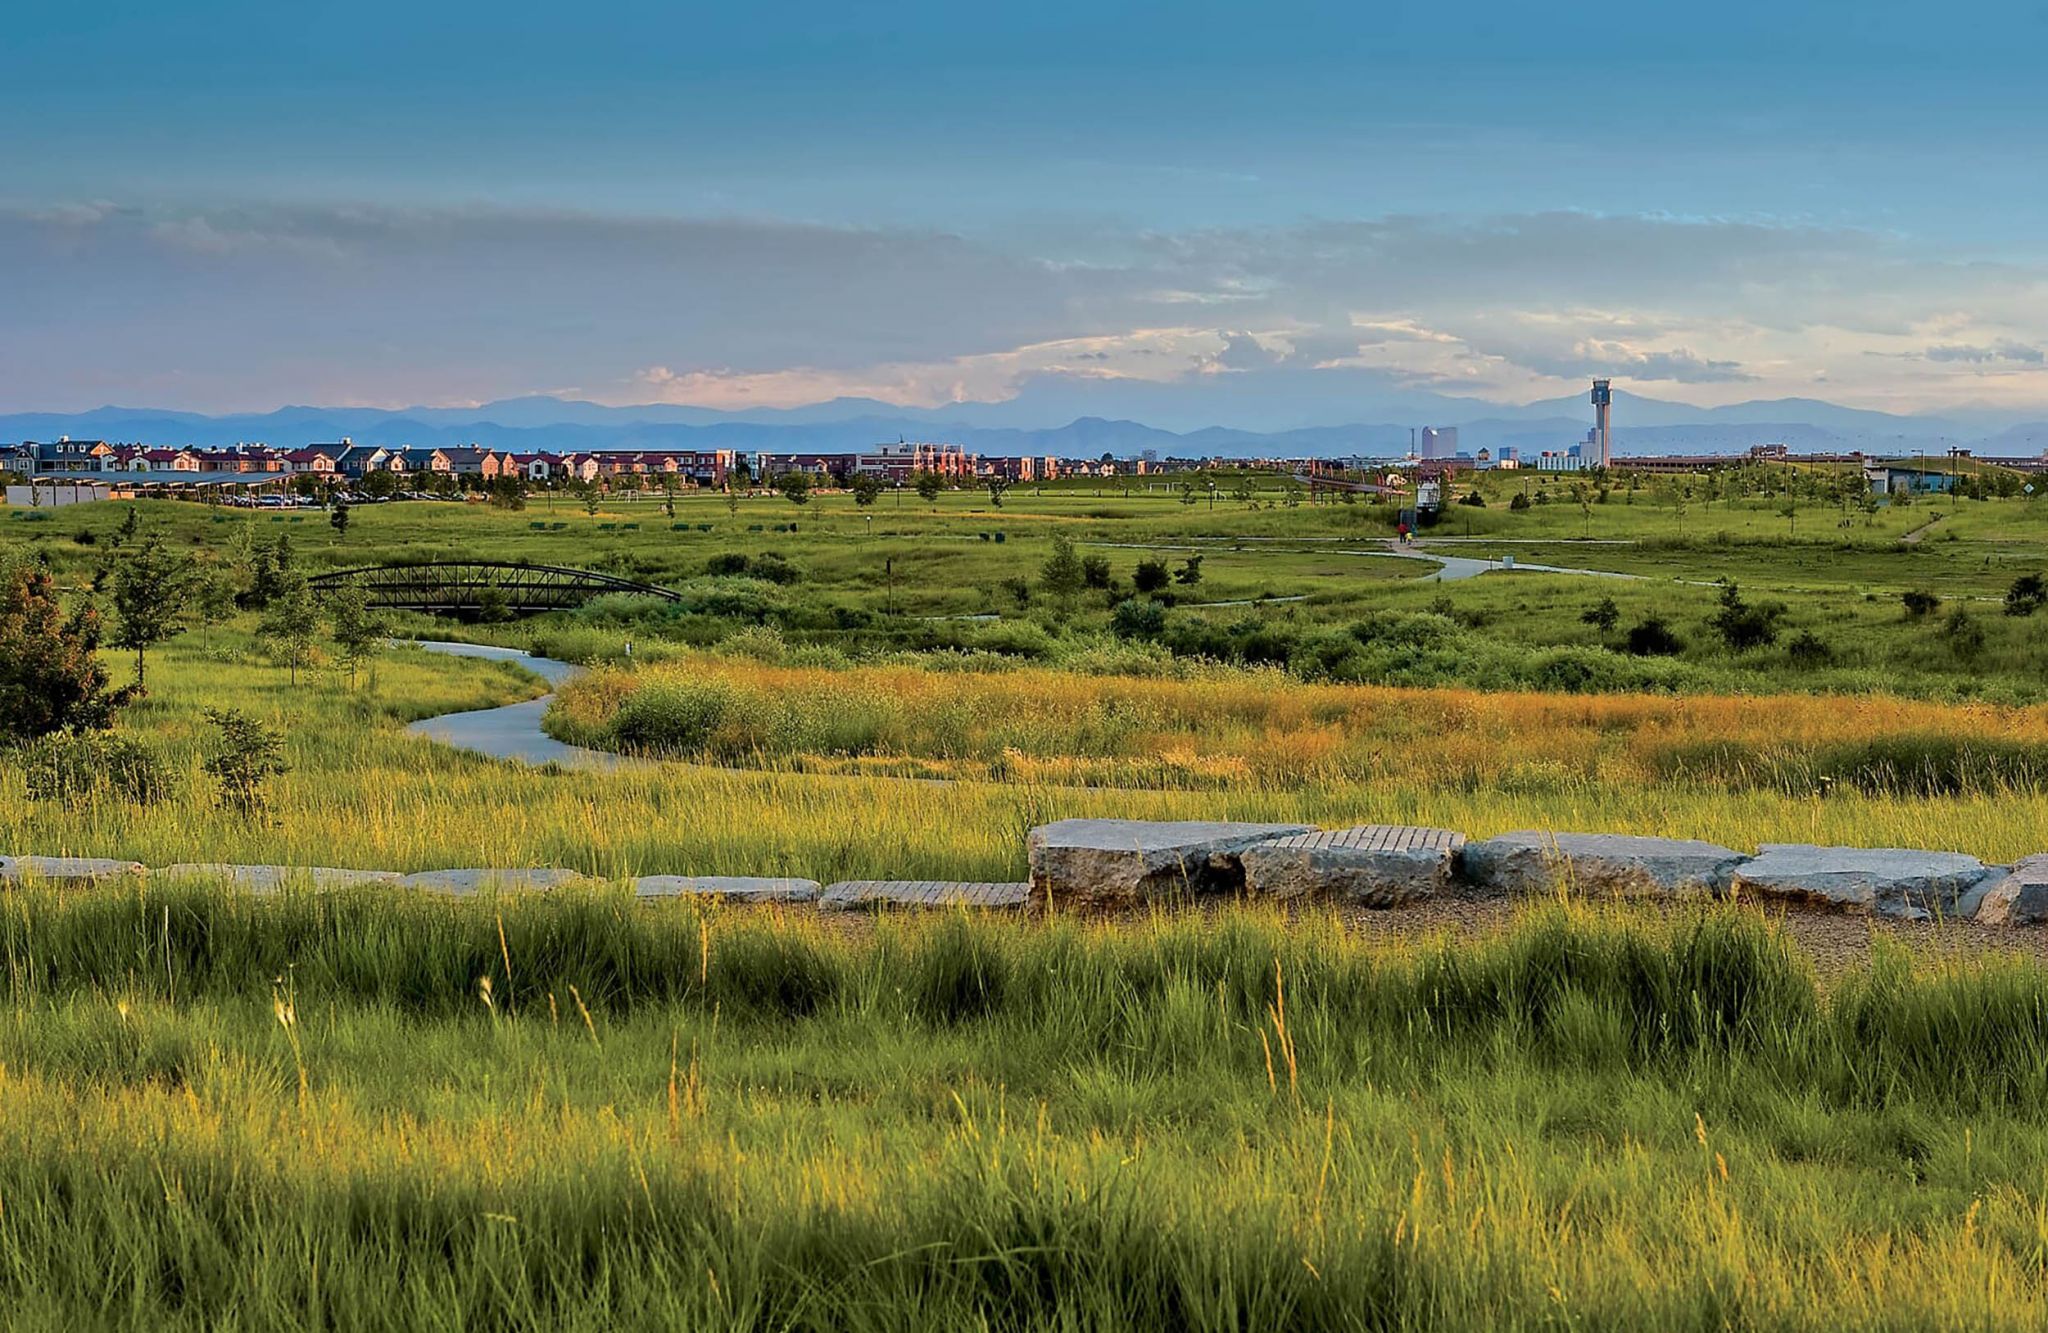 Trails through natural grasslands with residential community and Rocky Mountains in the background